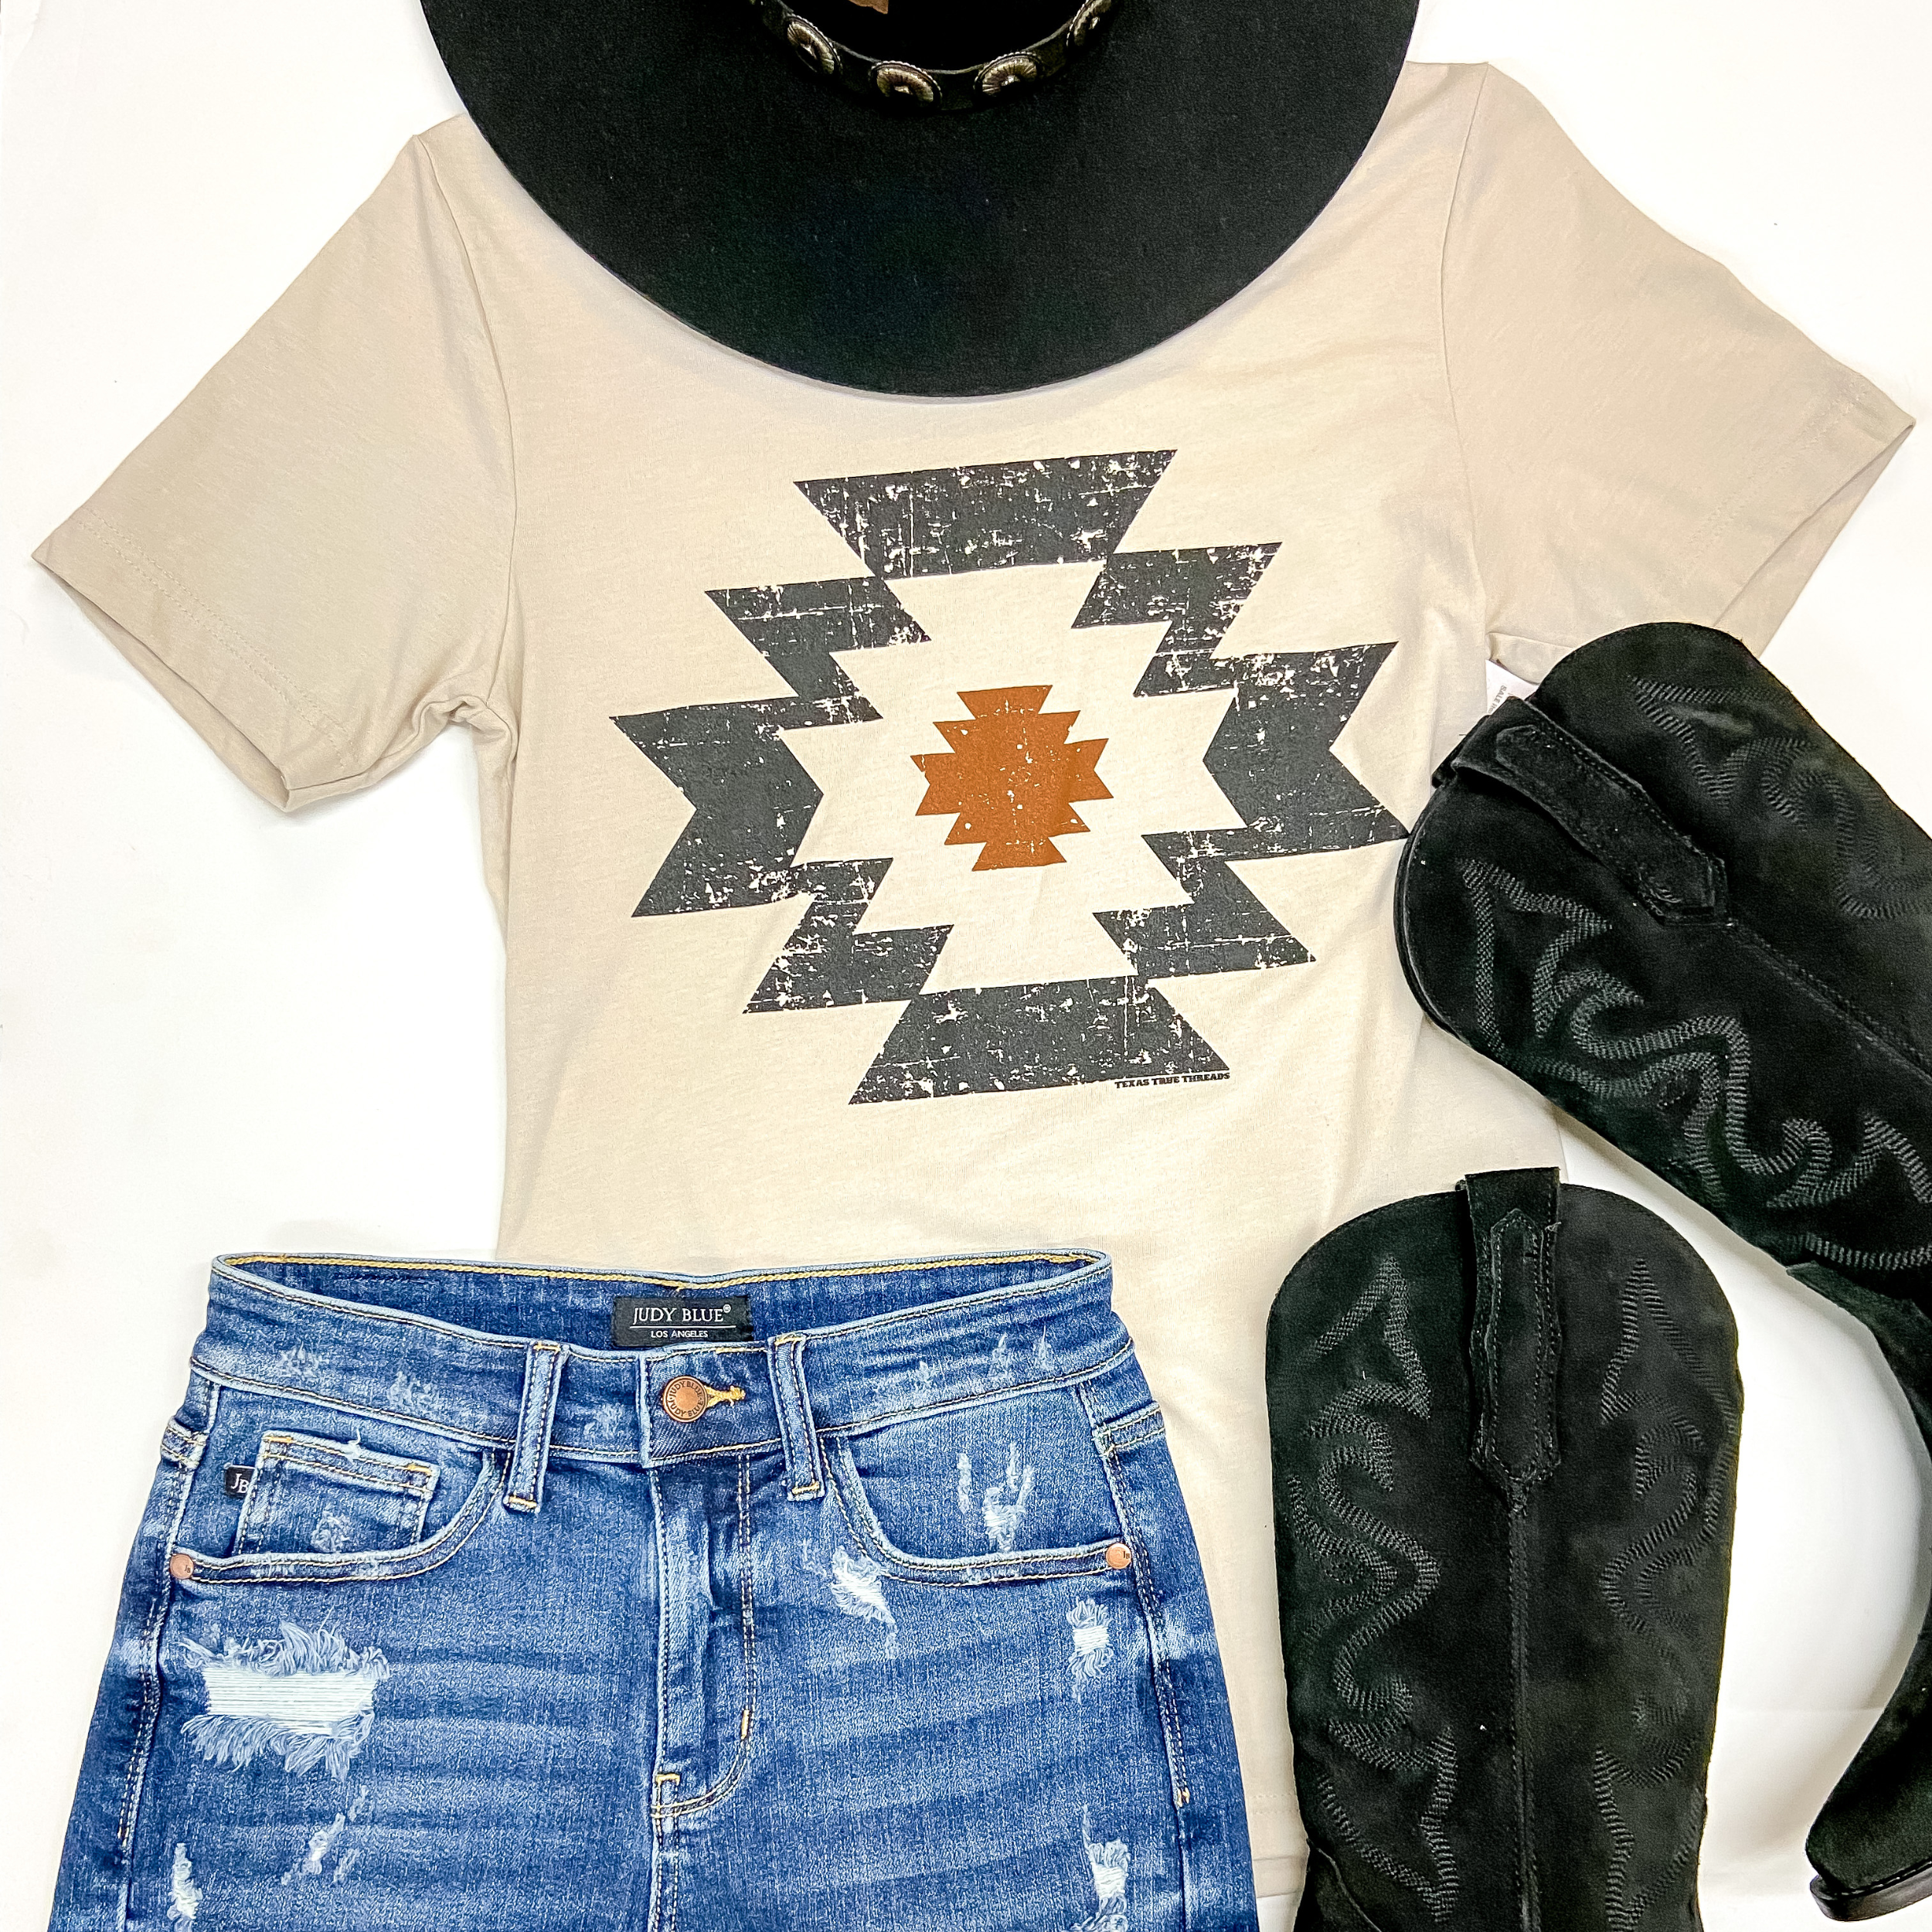 A beige short sleeve graphic tee with a black and orange tribal symbol graphic. This tee shirt is pictured on a white background with black boots, a black hat, and denim shorts.